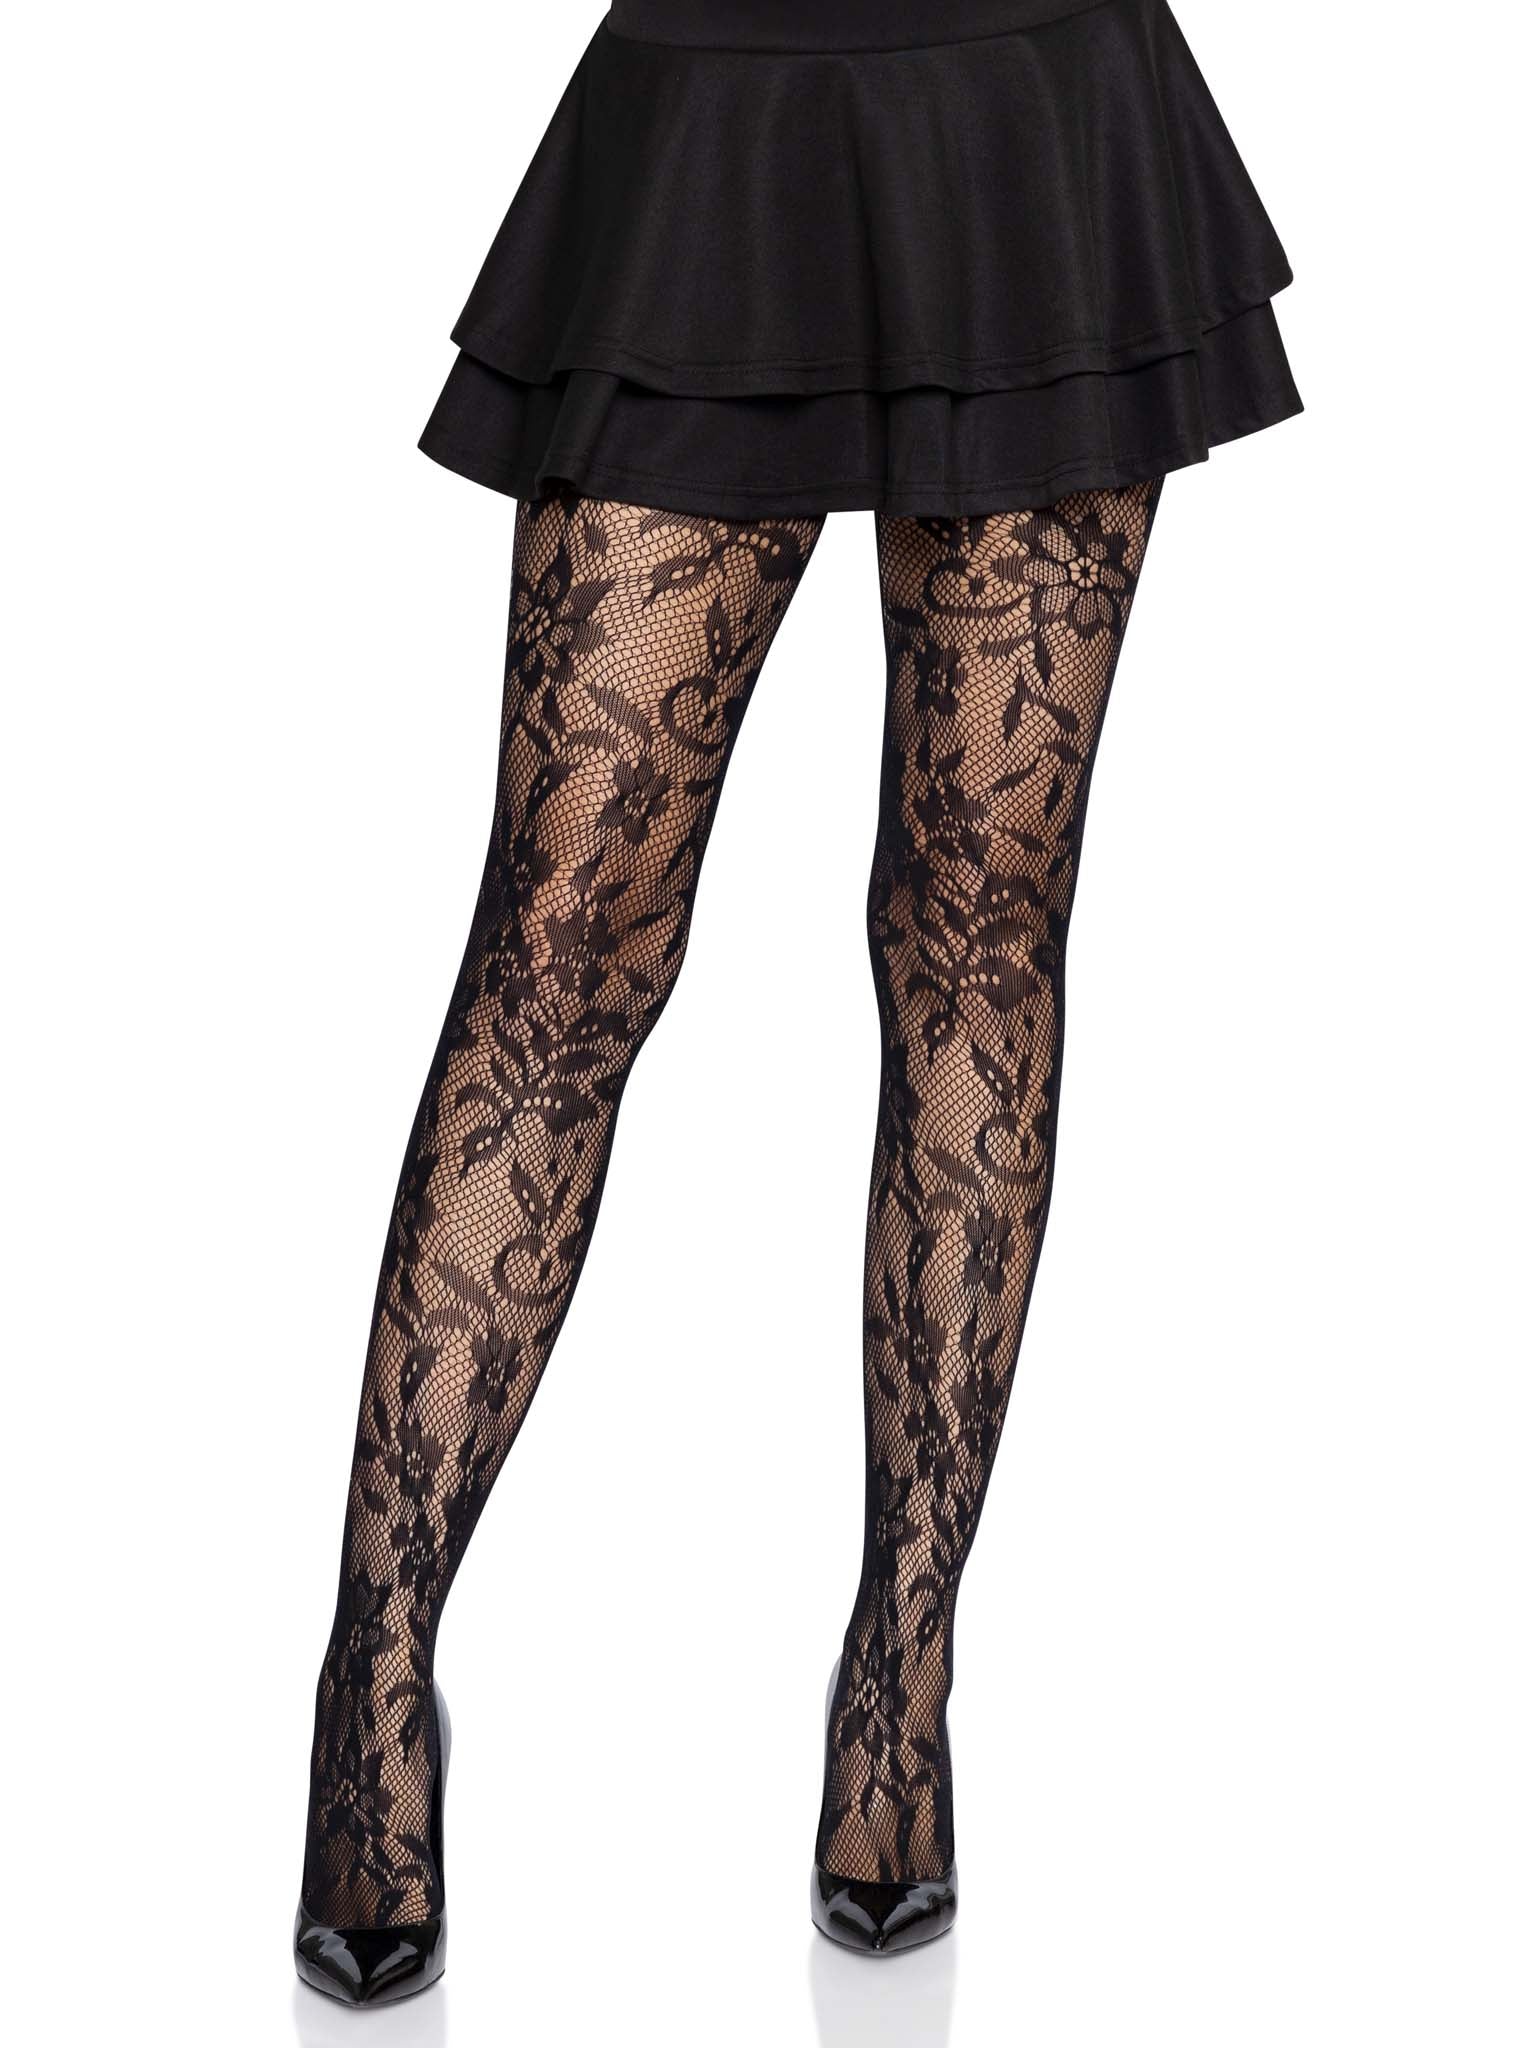 Seamless floral lace tights